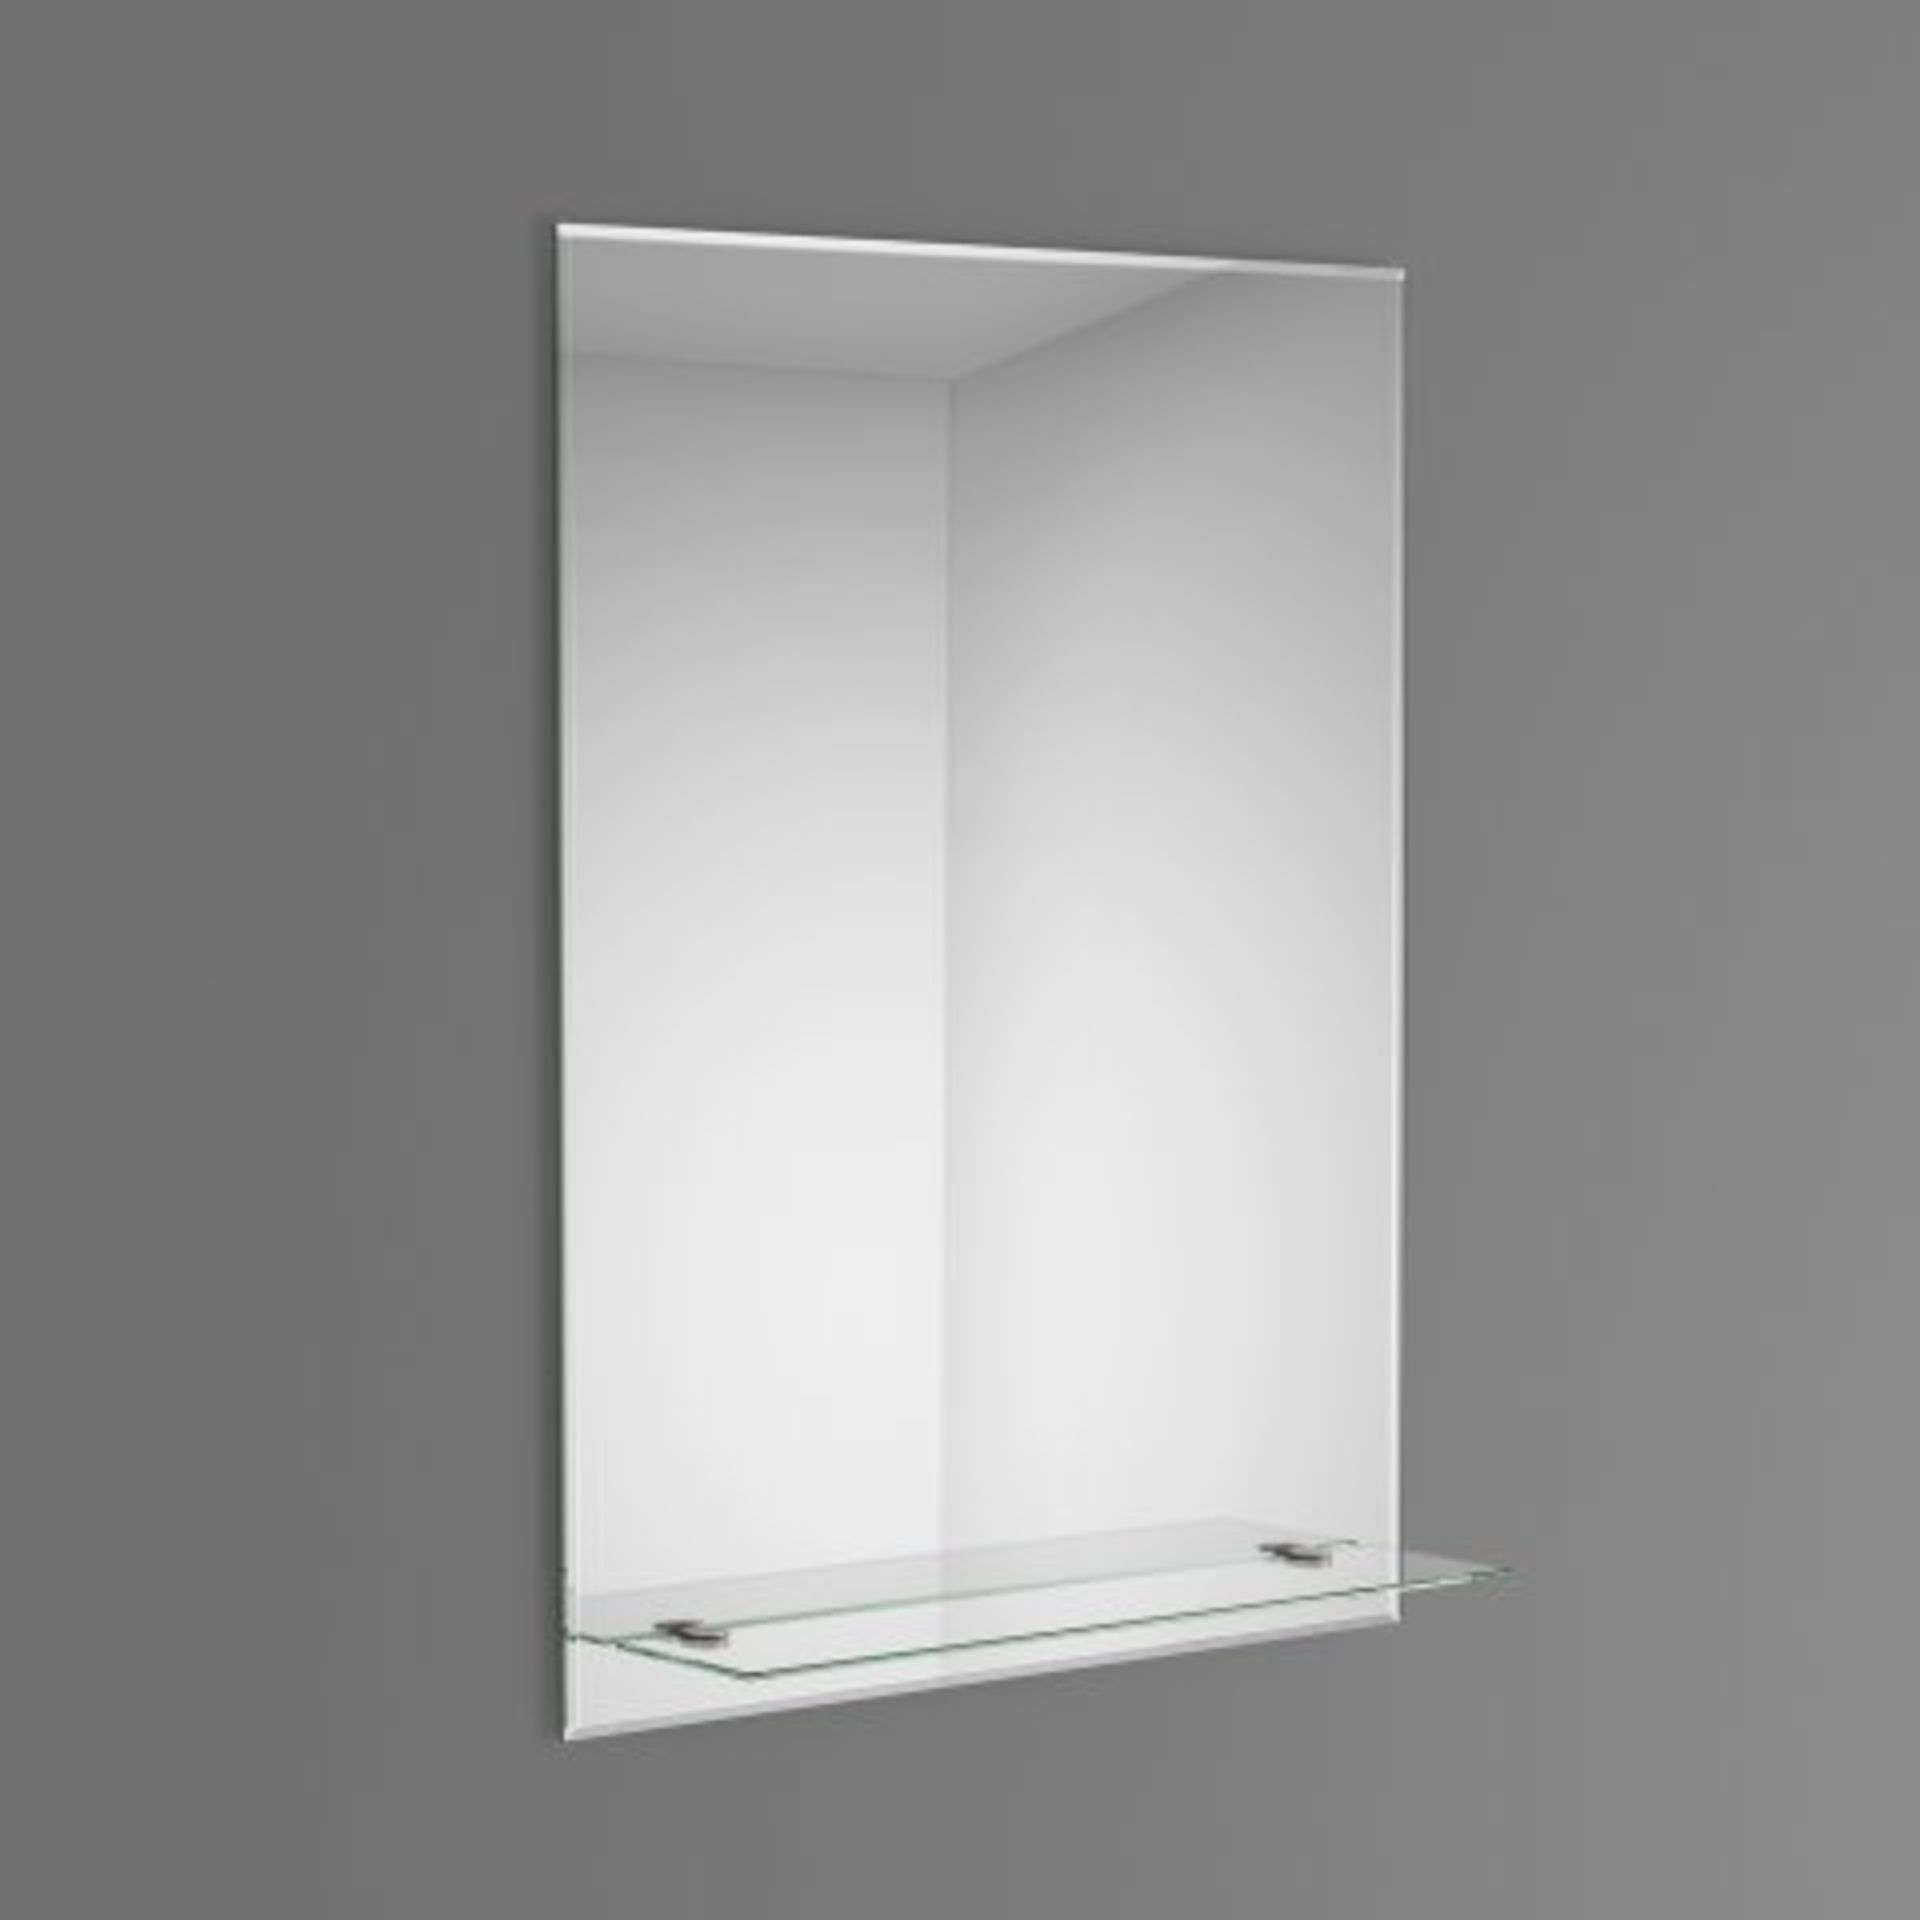 (M24) 600x800mm Hatton Mirror & Shelf Our stylish Hatton Mirror offers sleek corners and a - Image 2 of 3